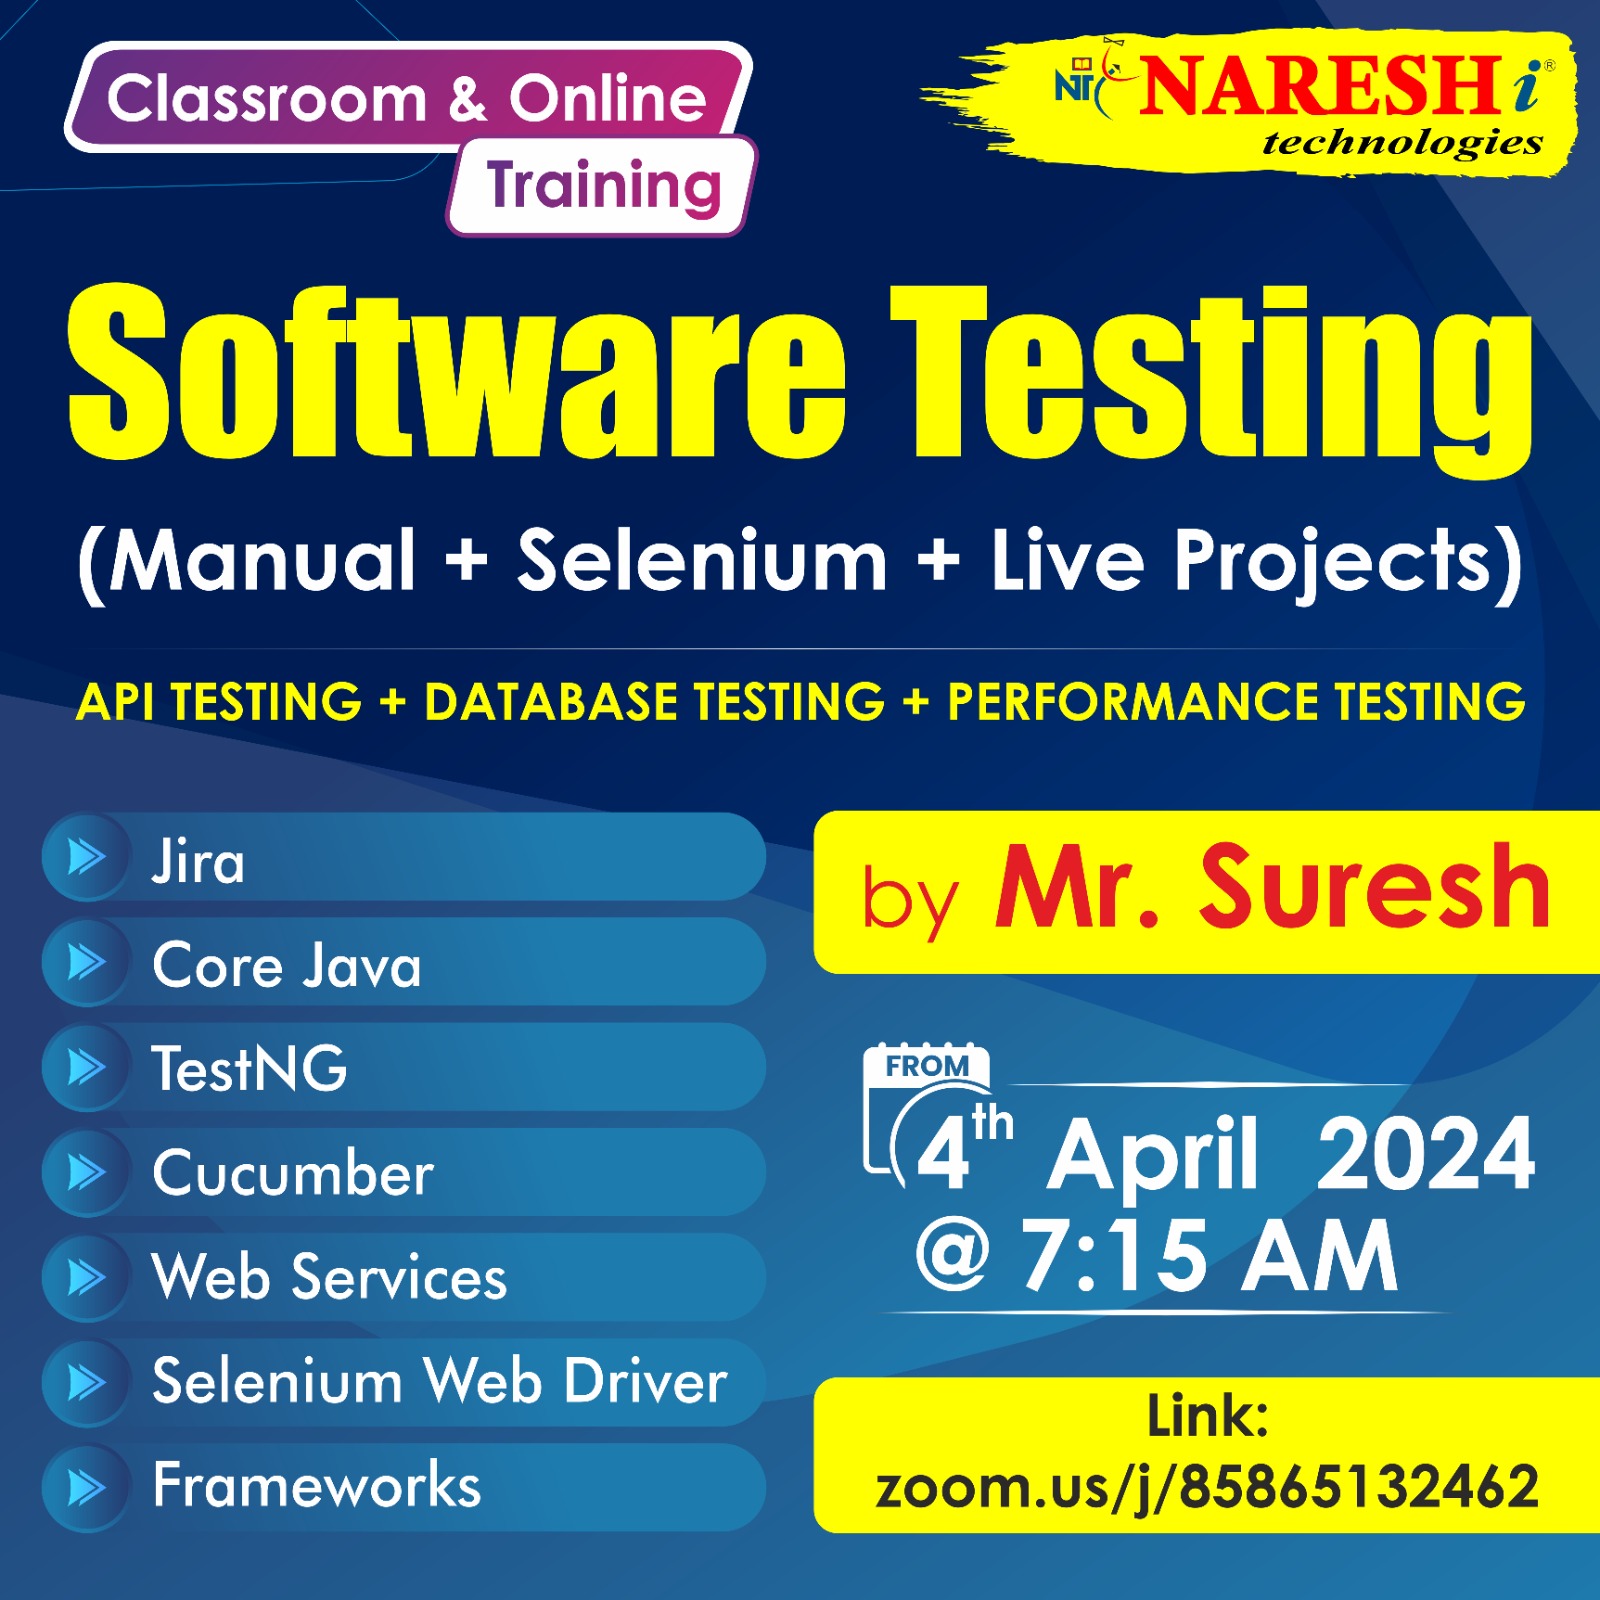 Top Software Testing Course Training in NareshIT Hyderabad, Online Event